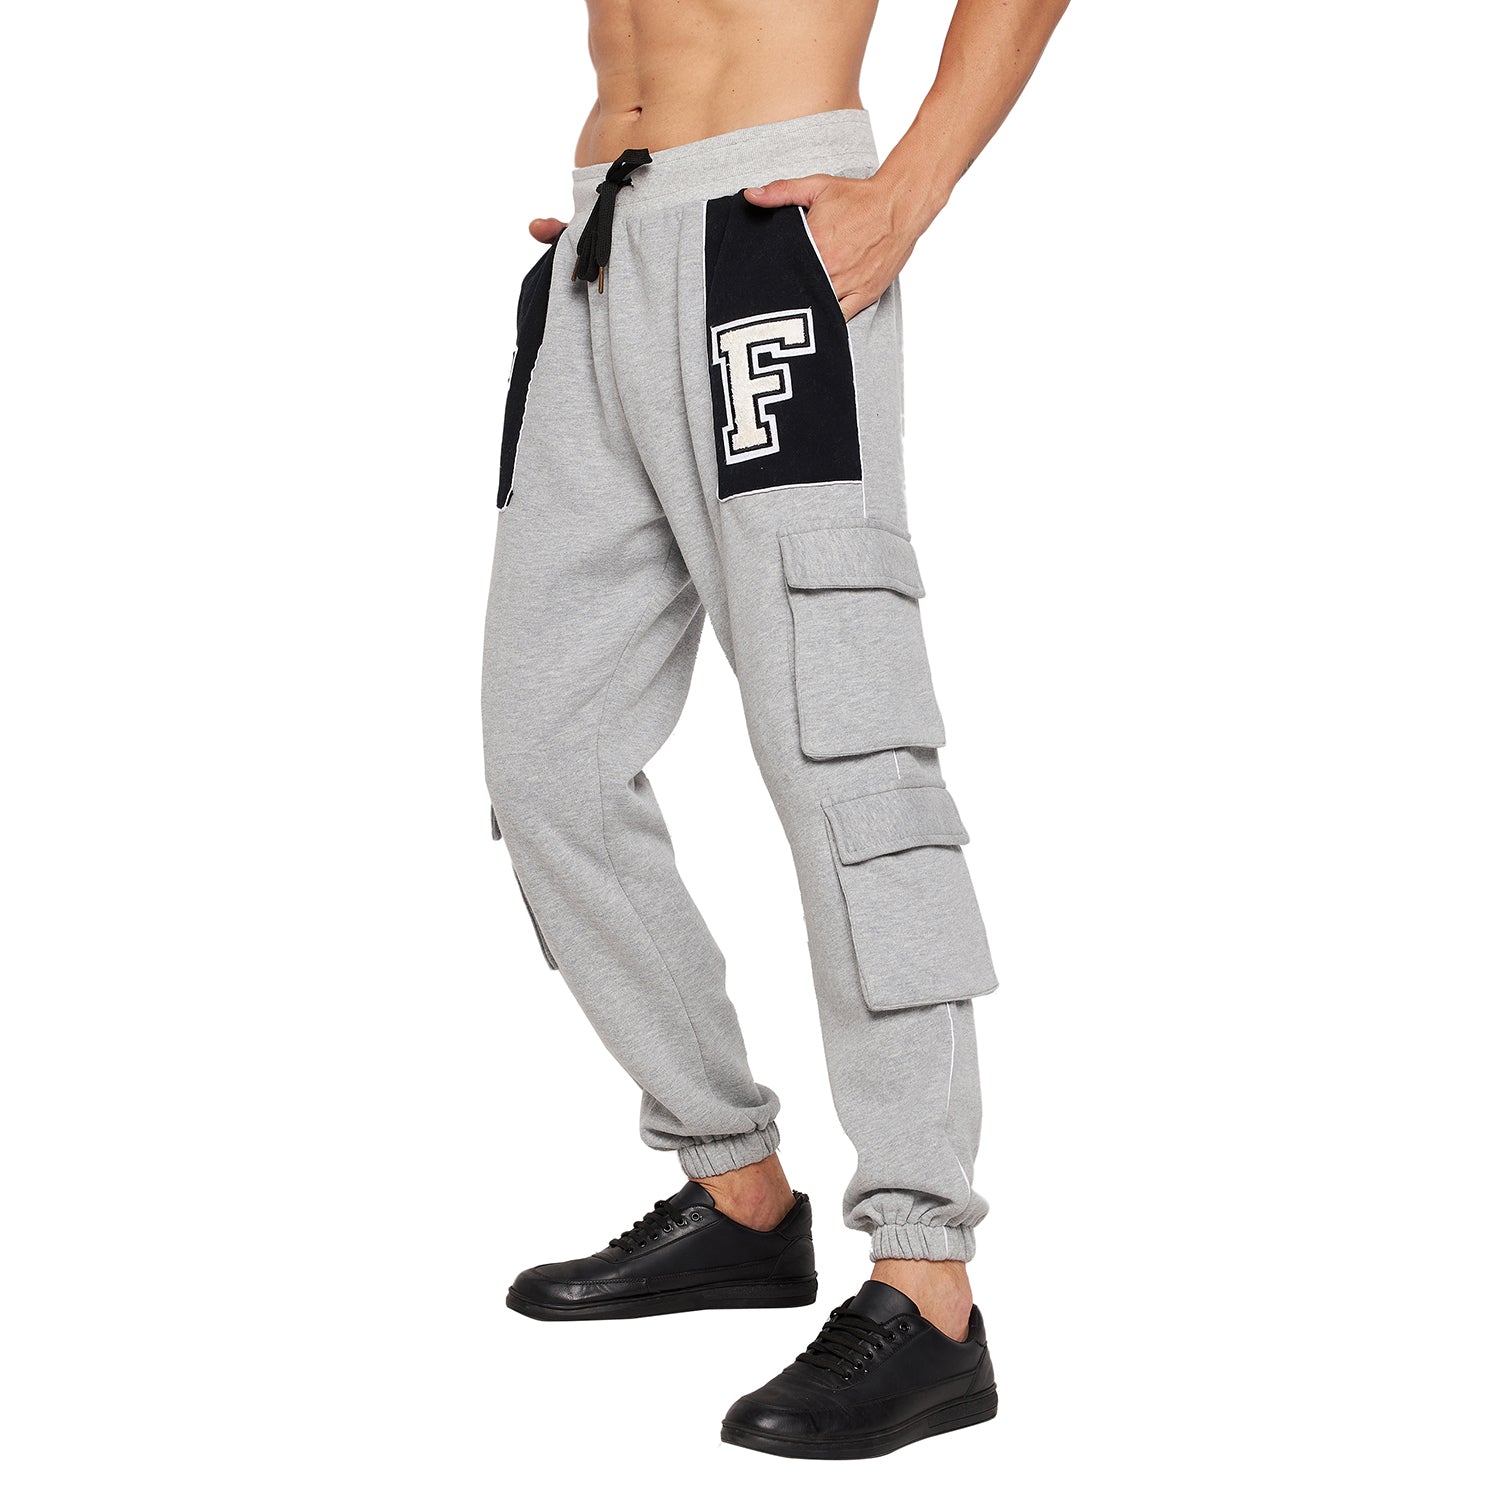 Men's Polyester Stylish Slim fit Solid Track pant